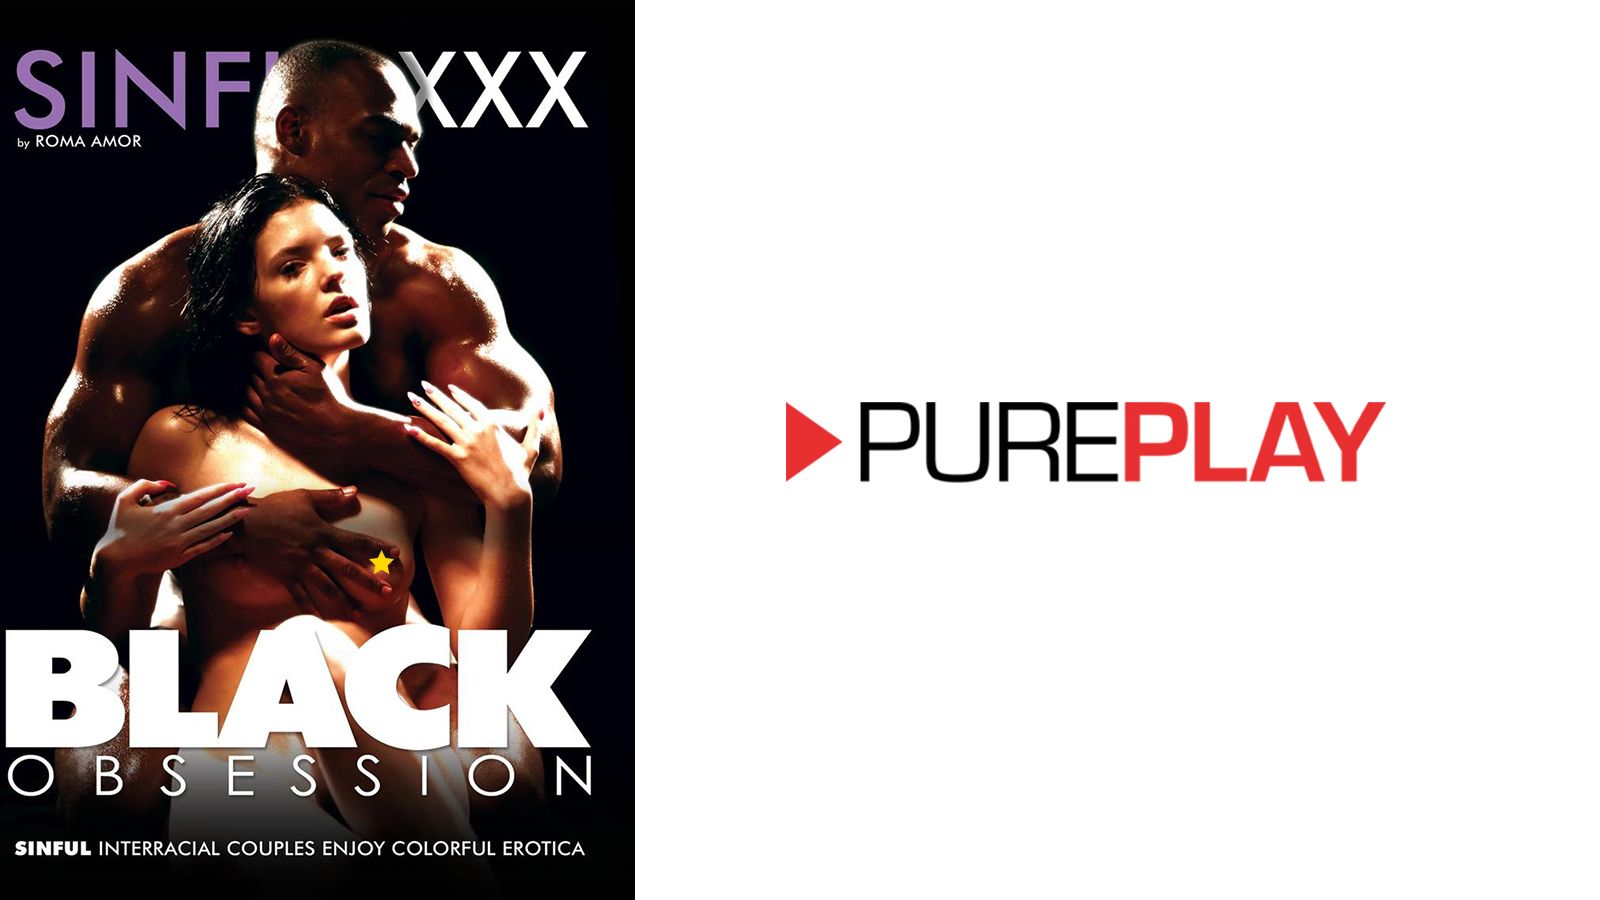 Interracial Meets Erotica In SinfulXXX's New ‘Black Obsession’